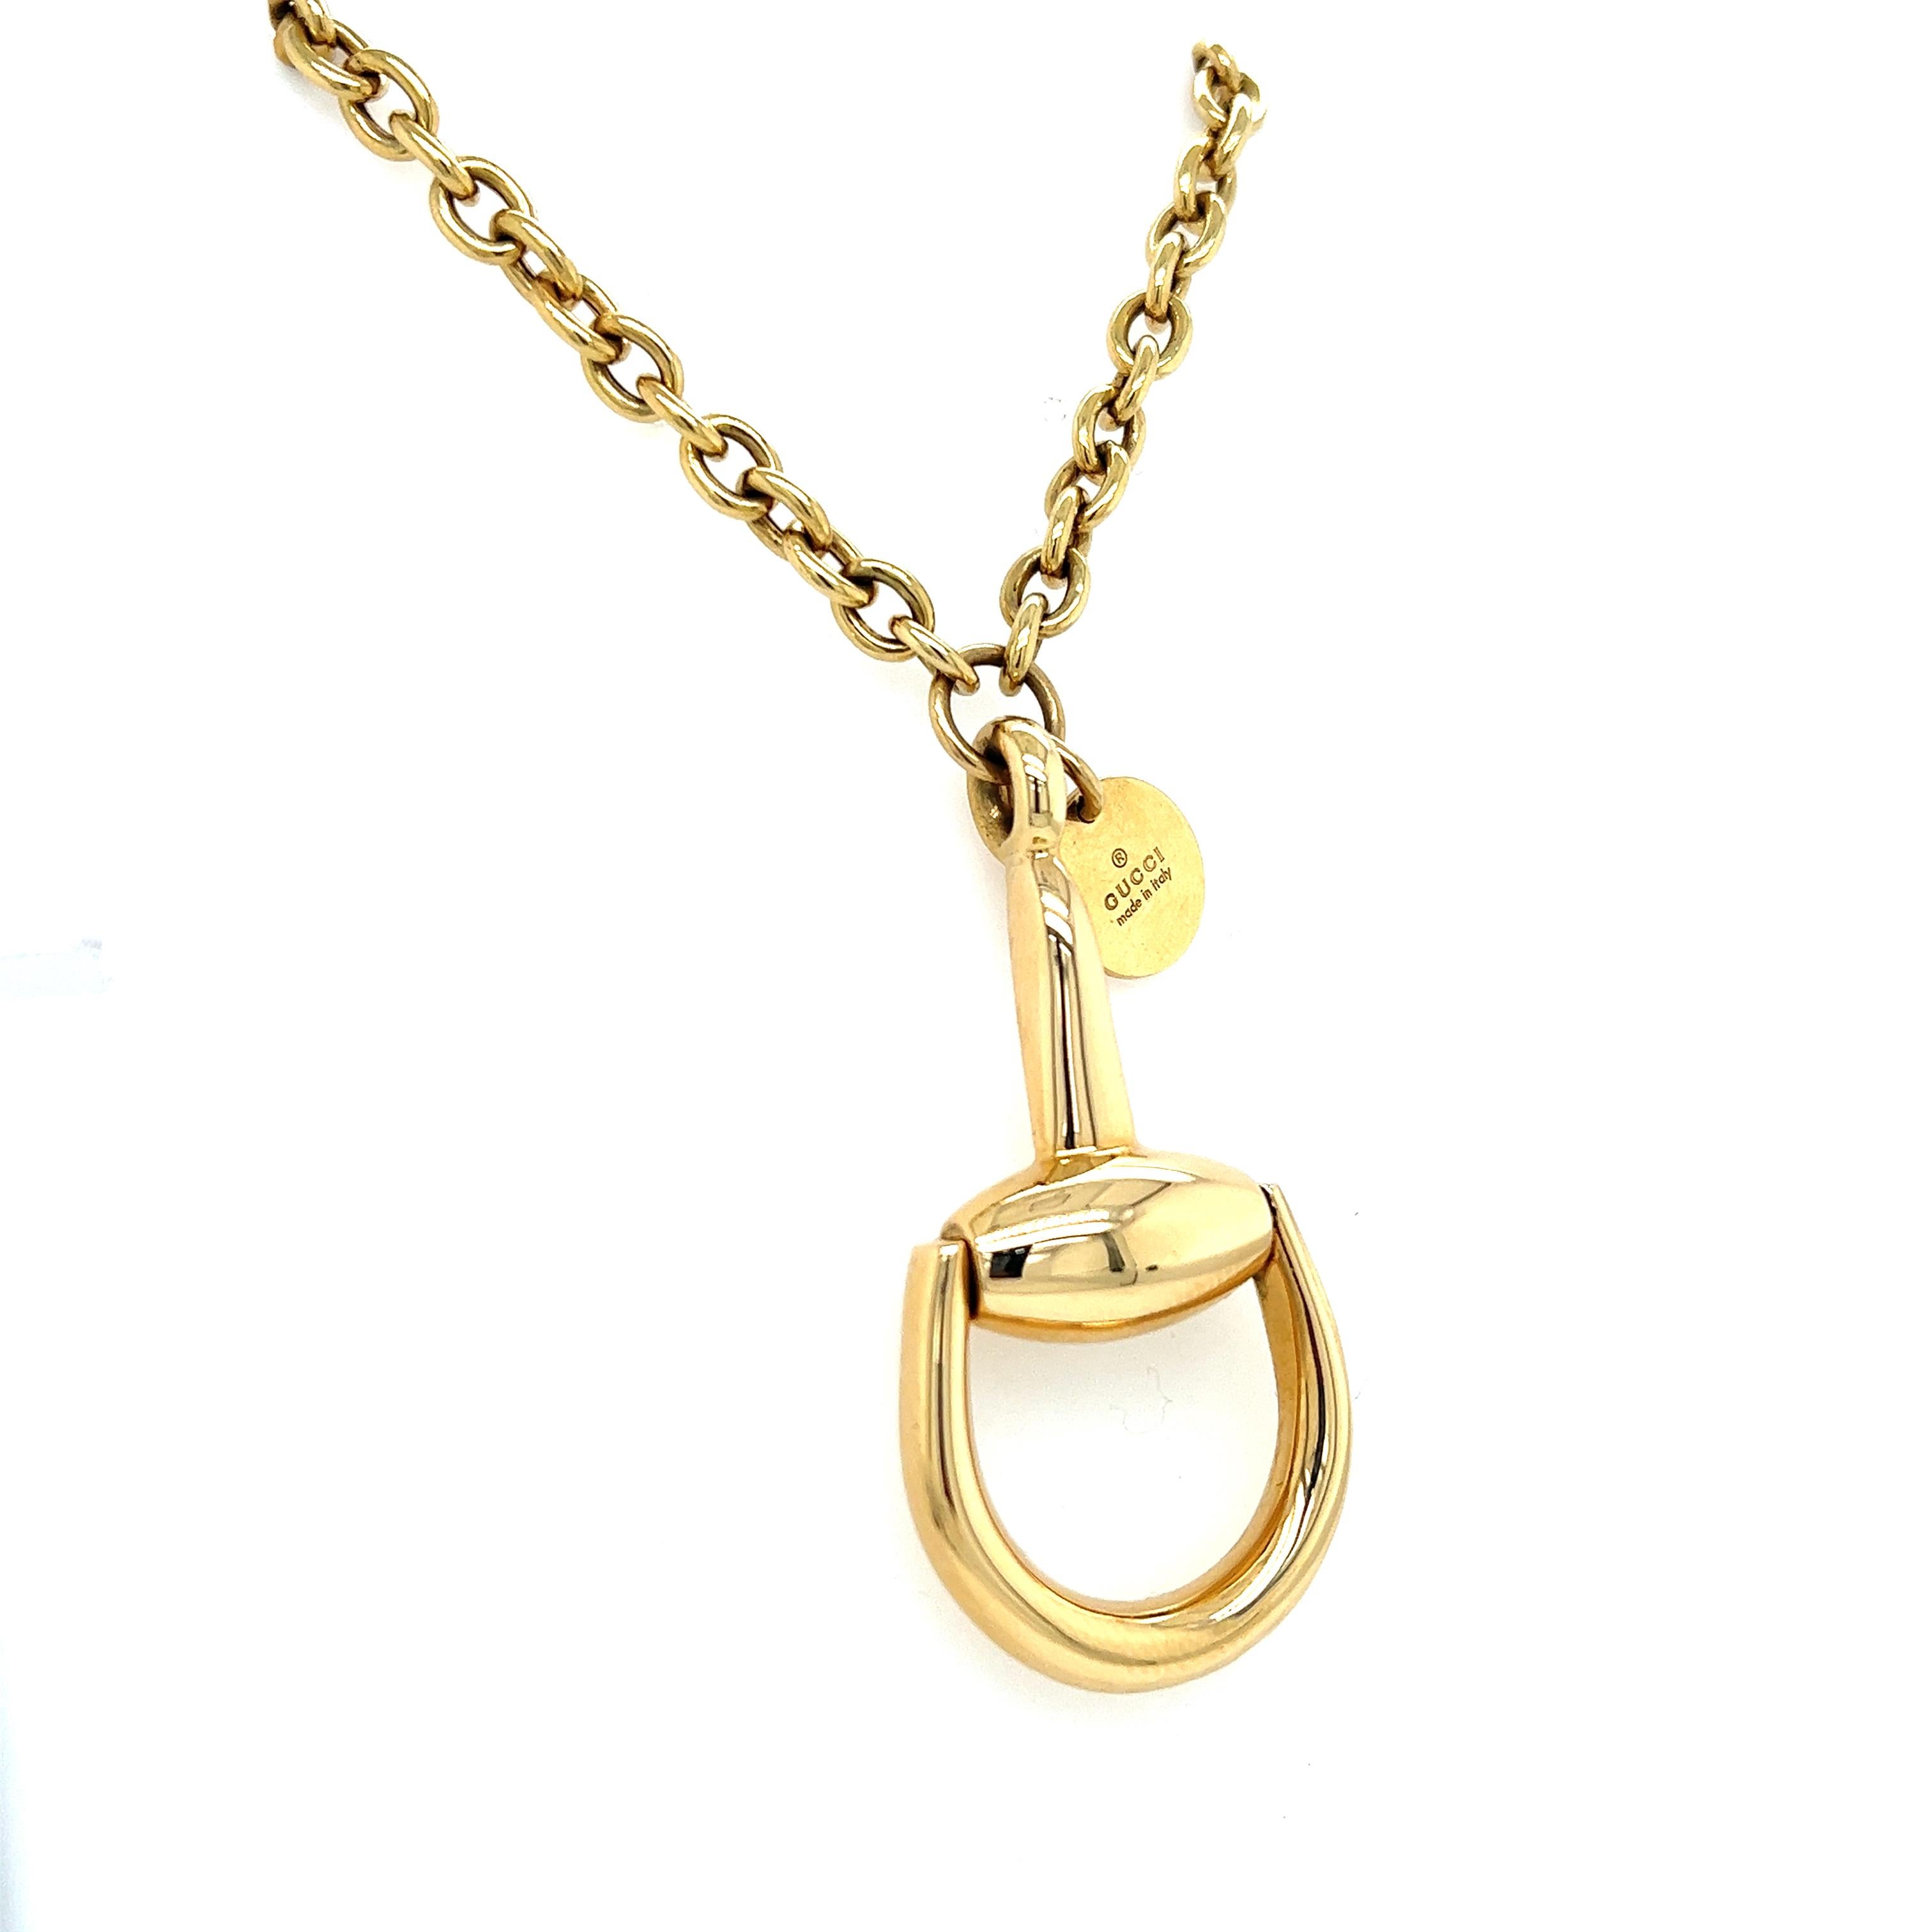 Beautiful necklace by famed designer Gucci. From the iconic Horsebit collection comes an exquisite 18K yellow gold necklace featuring a large equestrian-inspired high polished pendant that represents the luxury of Gucci's brand. 
The necklace